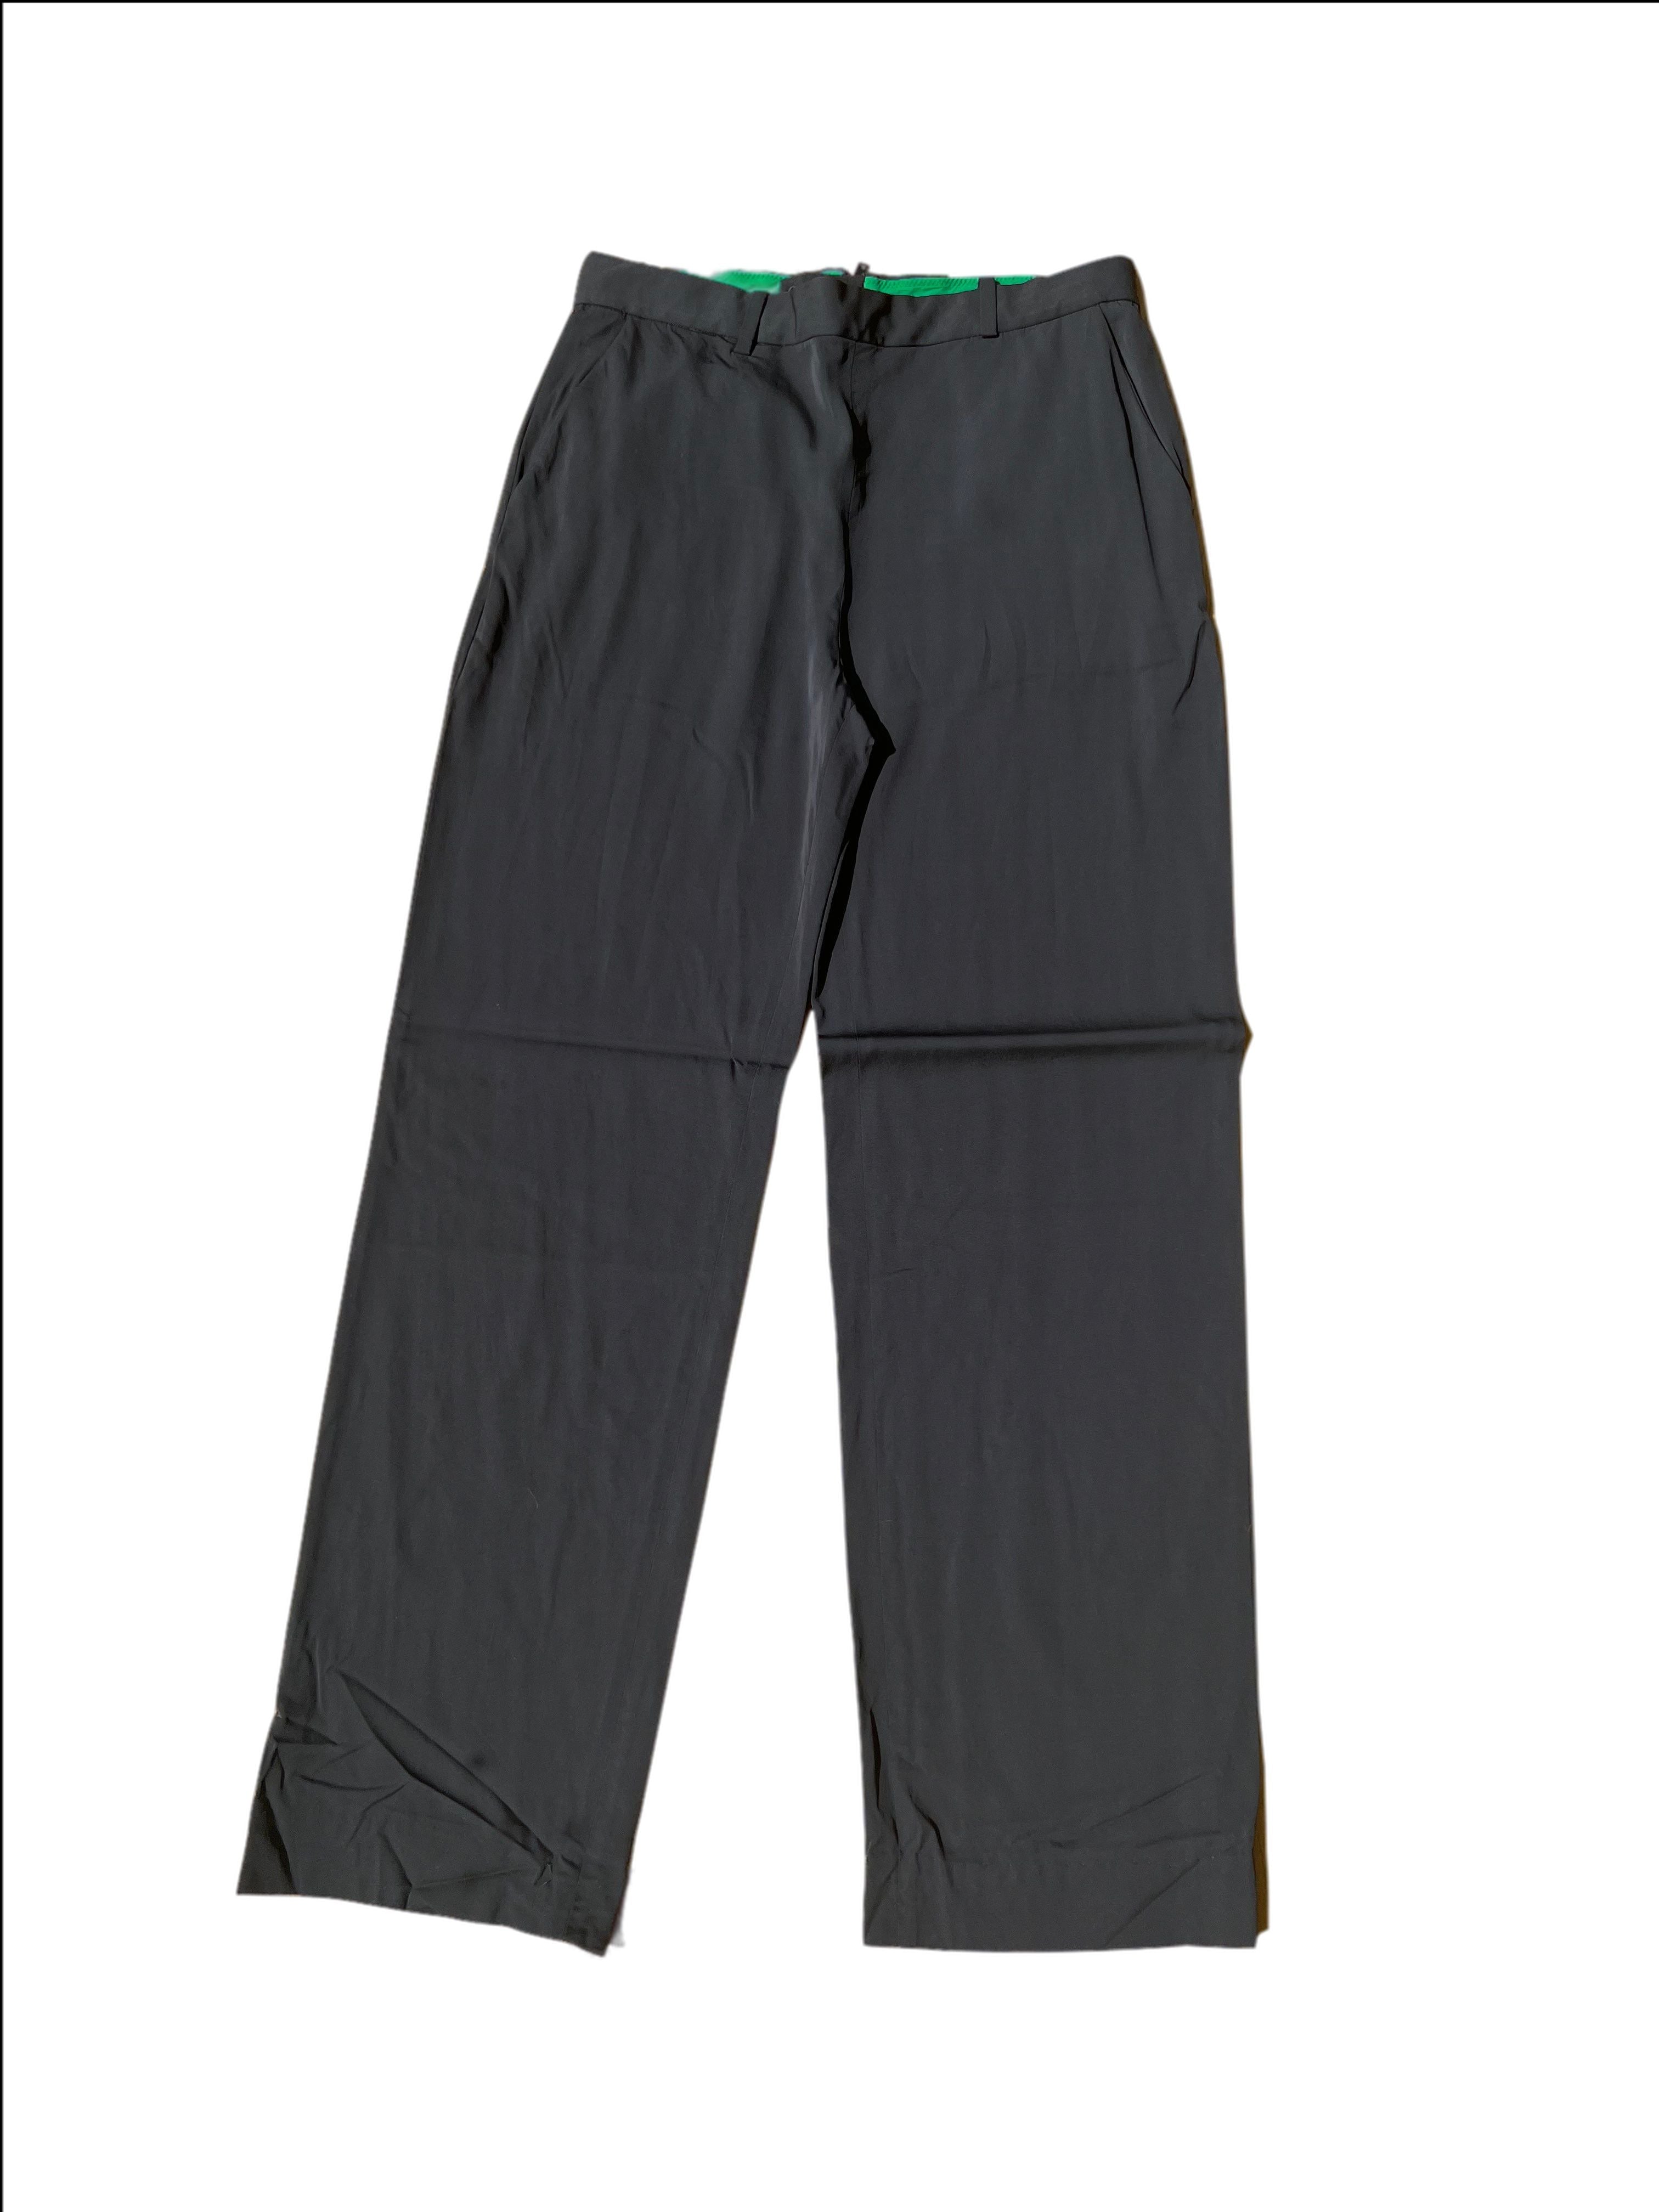 Buy Pre-Owned Cos Womens Size 6 Wool Pants at Ubuy India